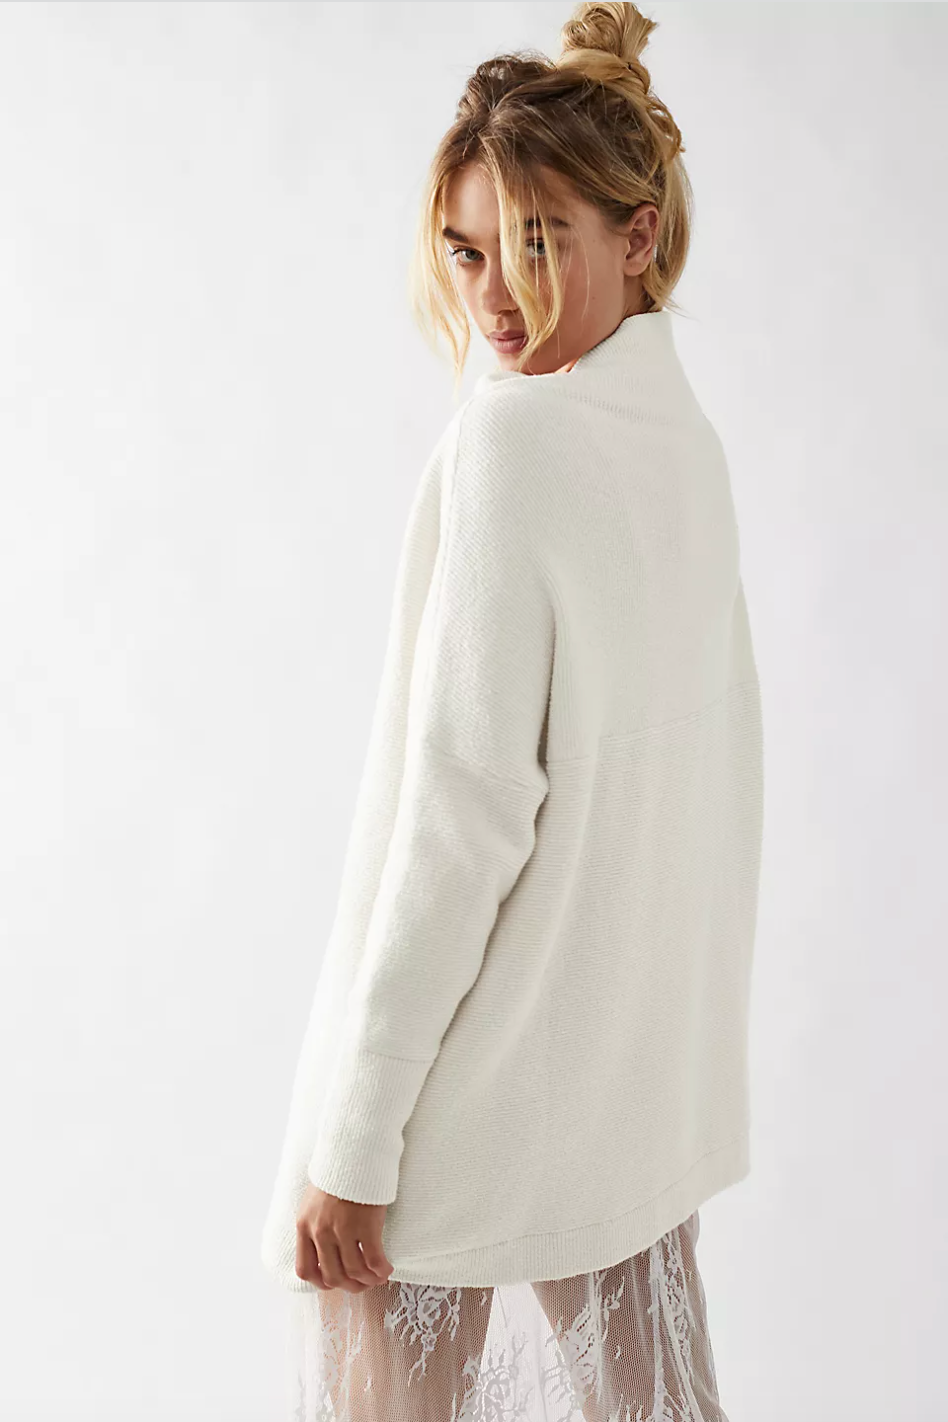 Photo of model wearing Ottoman Slouchy Tunic in the colour Ecru from Free People available at UniKoncept in Waterloo